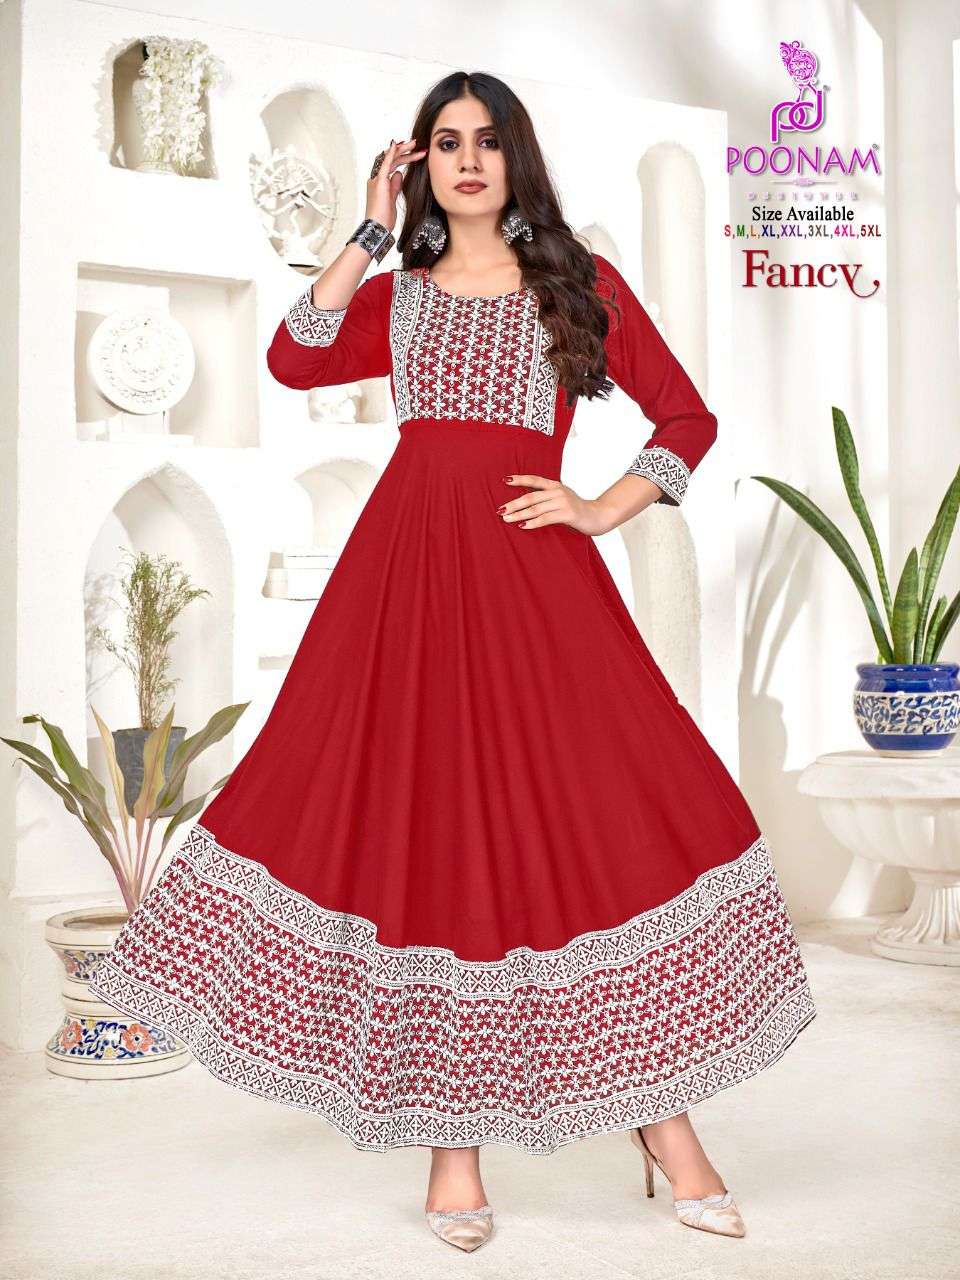 poonam fancy rayon chikan work gown wholesale supply in Malaysia singapore 